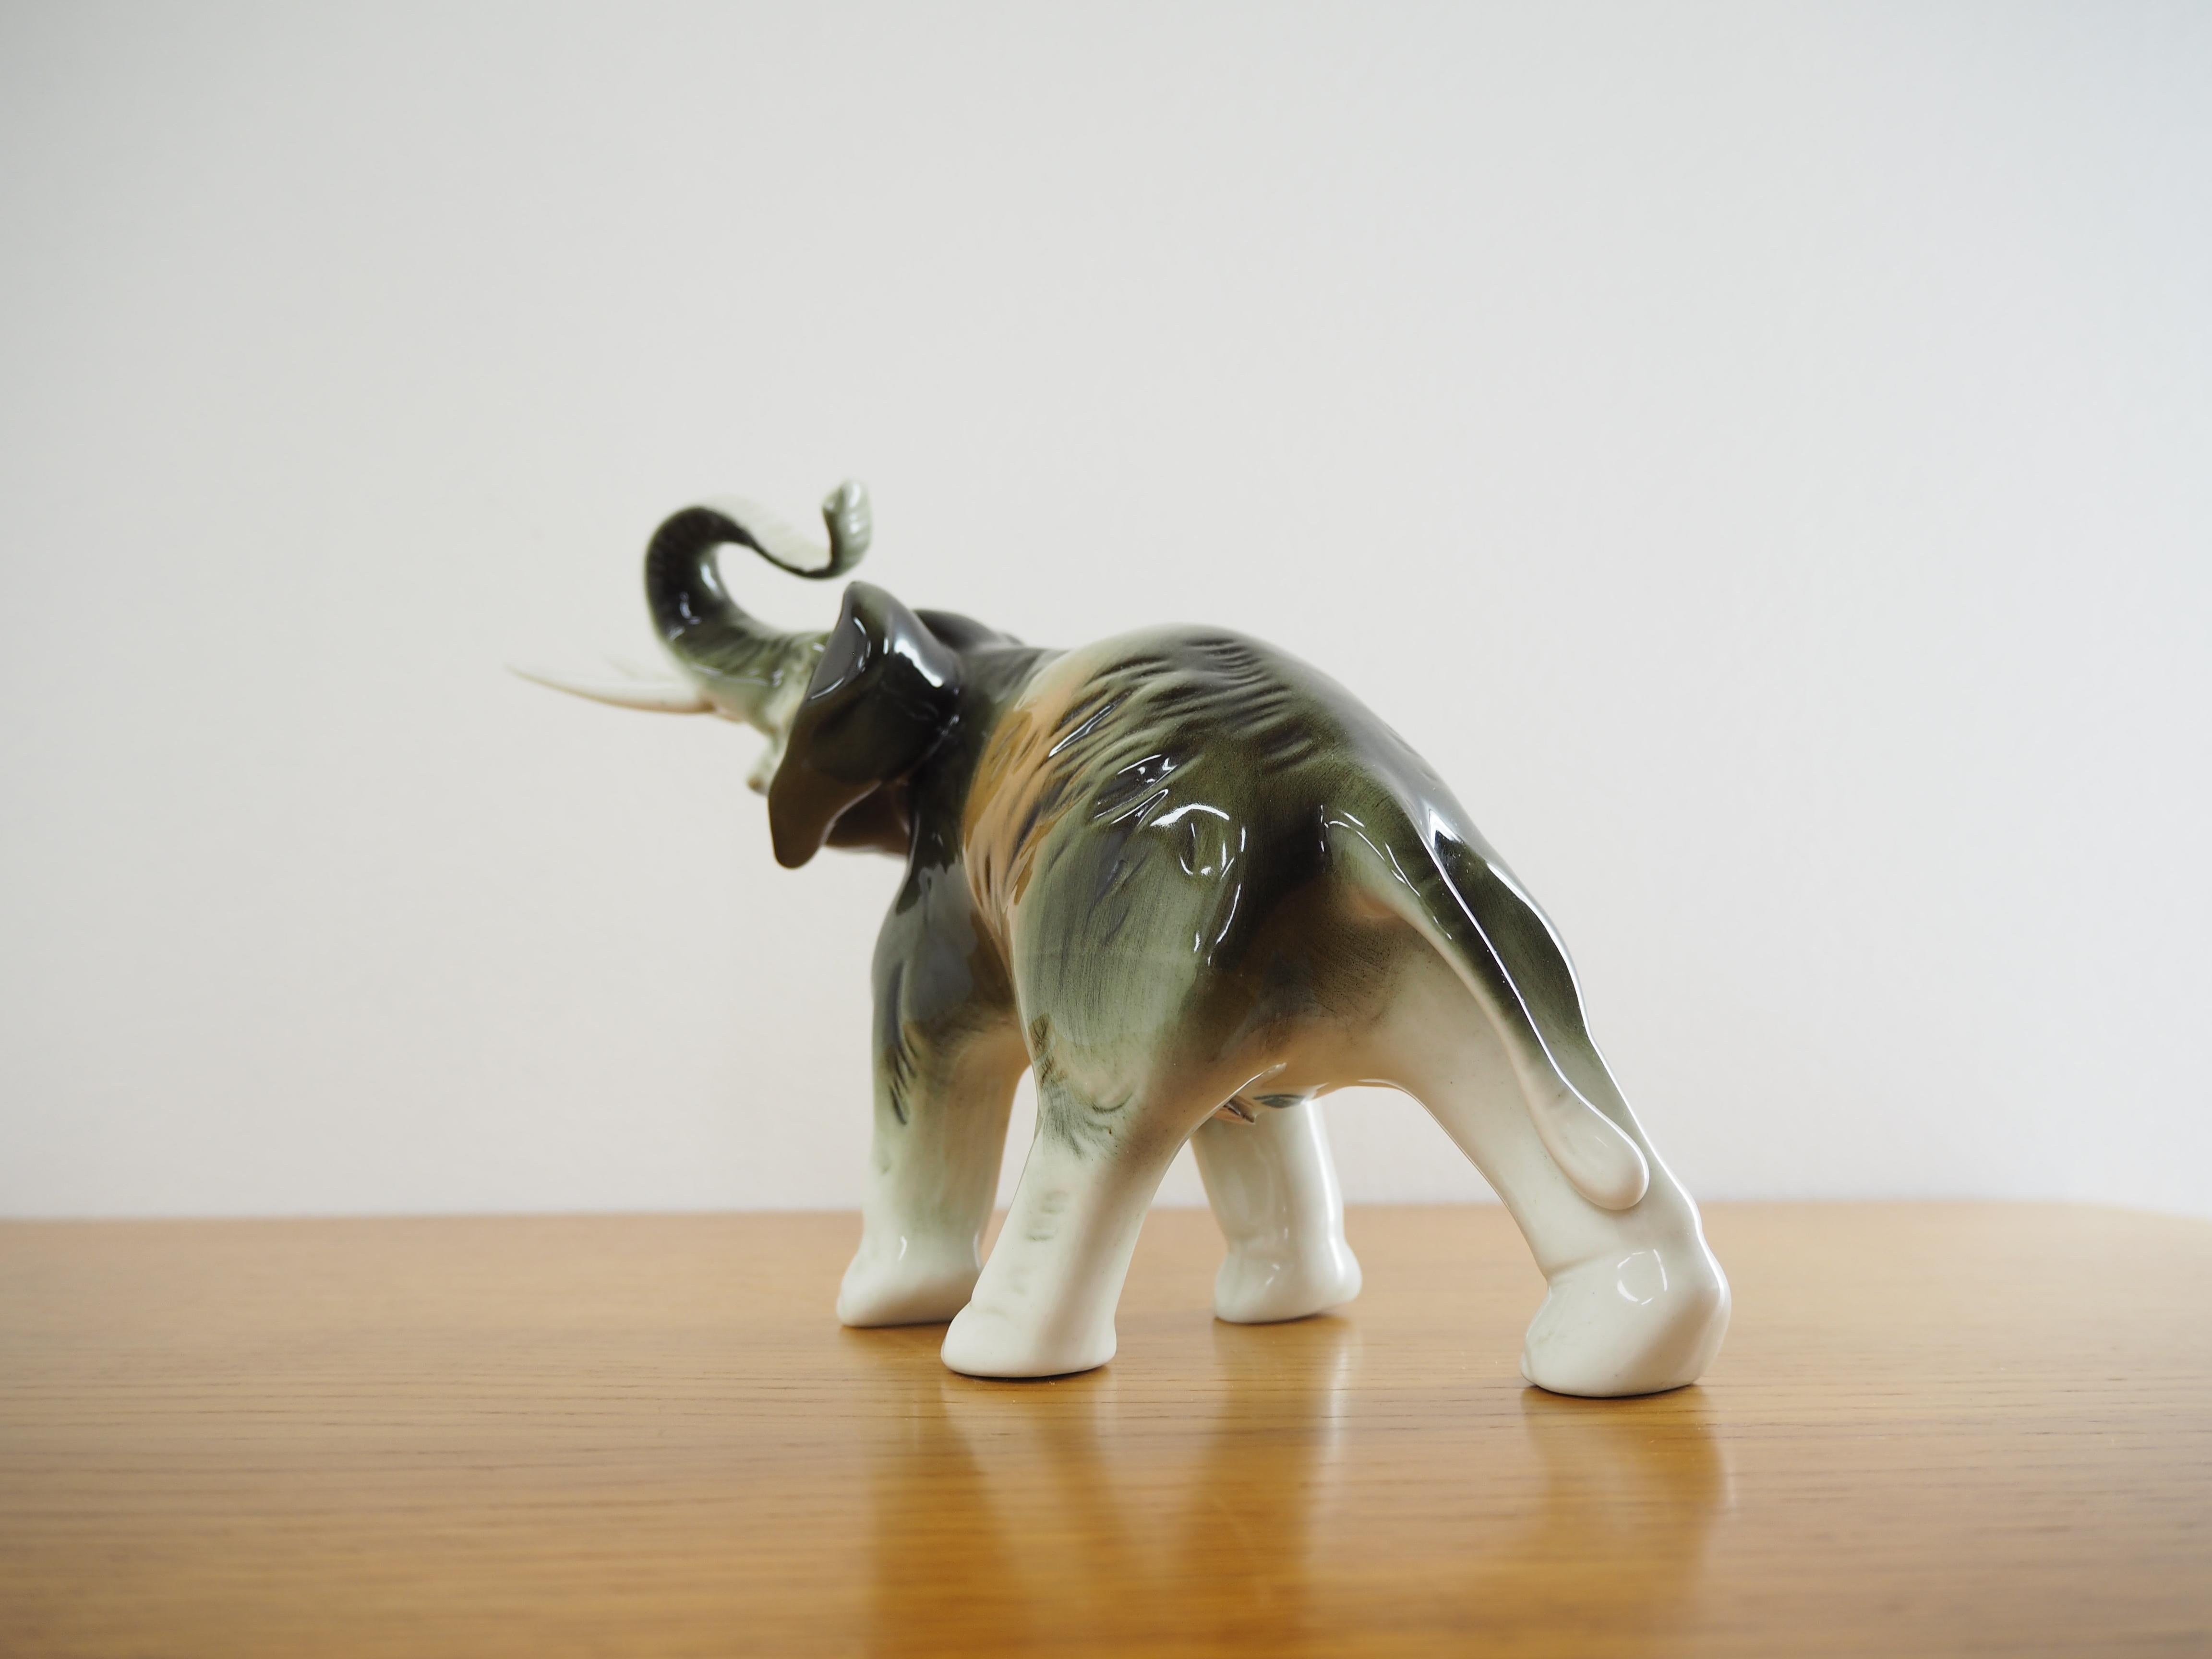 Mid-Century Modern Midcentury Porcelain Sculpture of Elephant from Royal Dux, 1960s